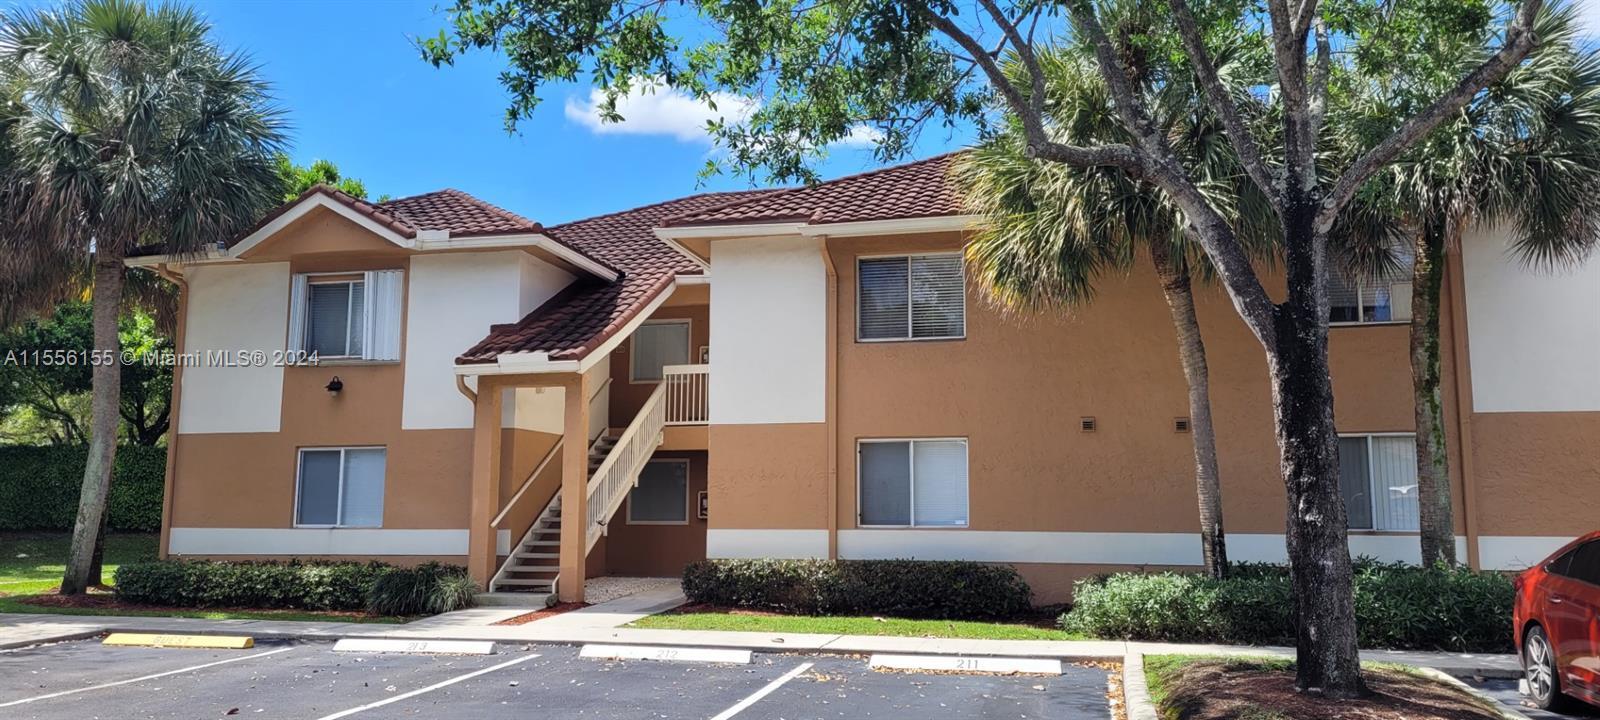 Photo of 730 NW 91st Ter #730 in Plantation, FL